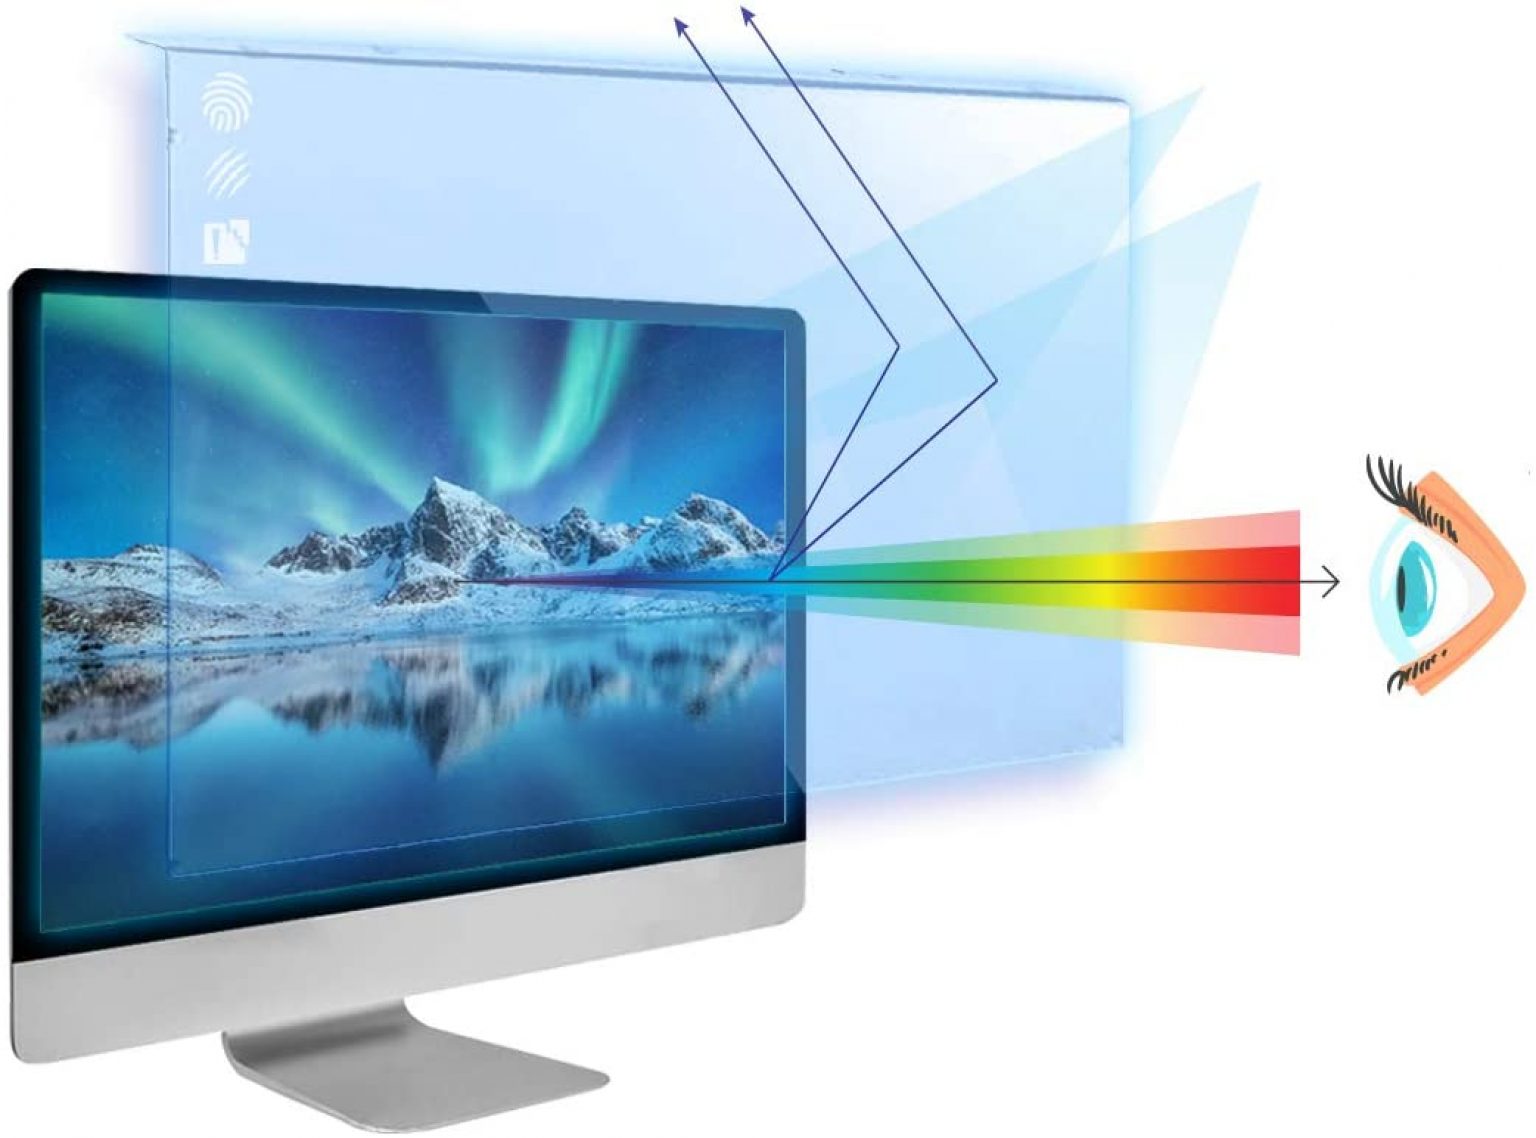 removable anti glare screen for laptop